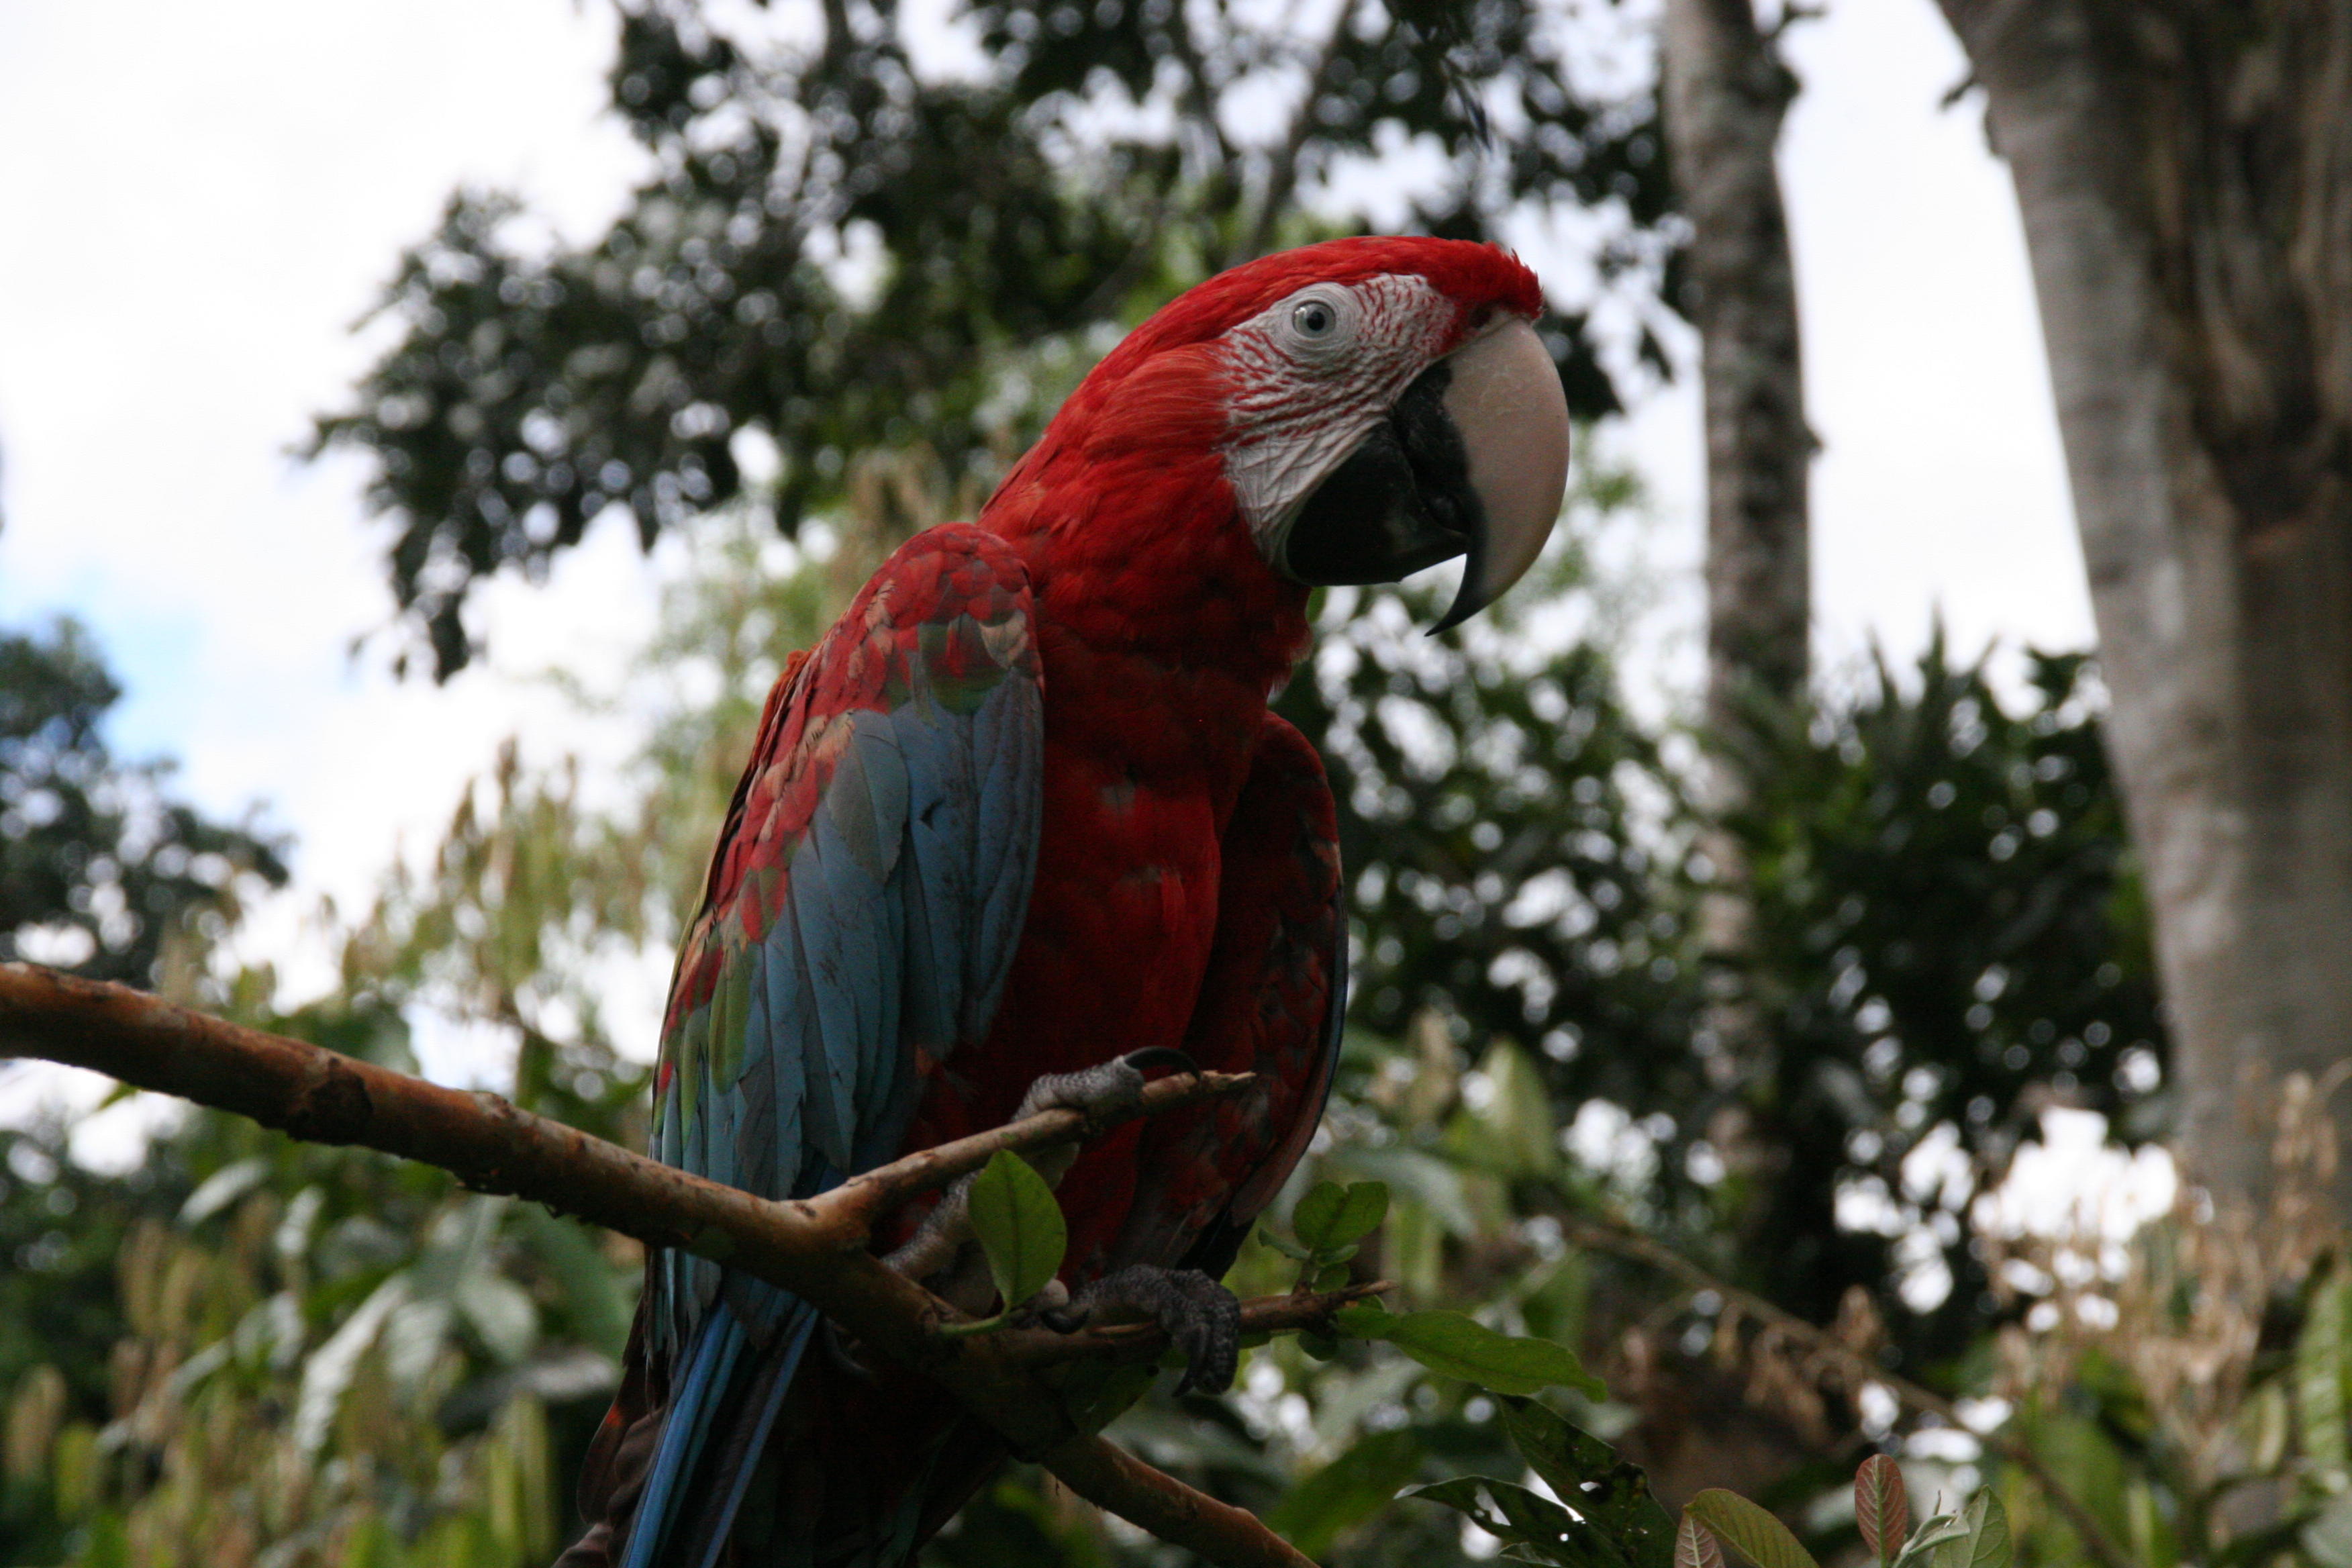 Macaws are the largest birds in the parrot family